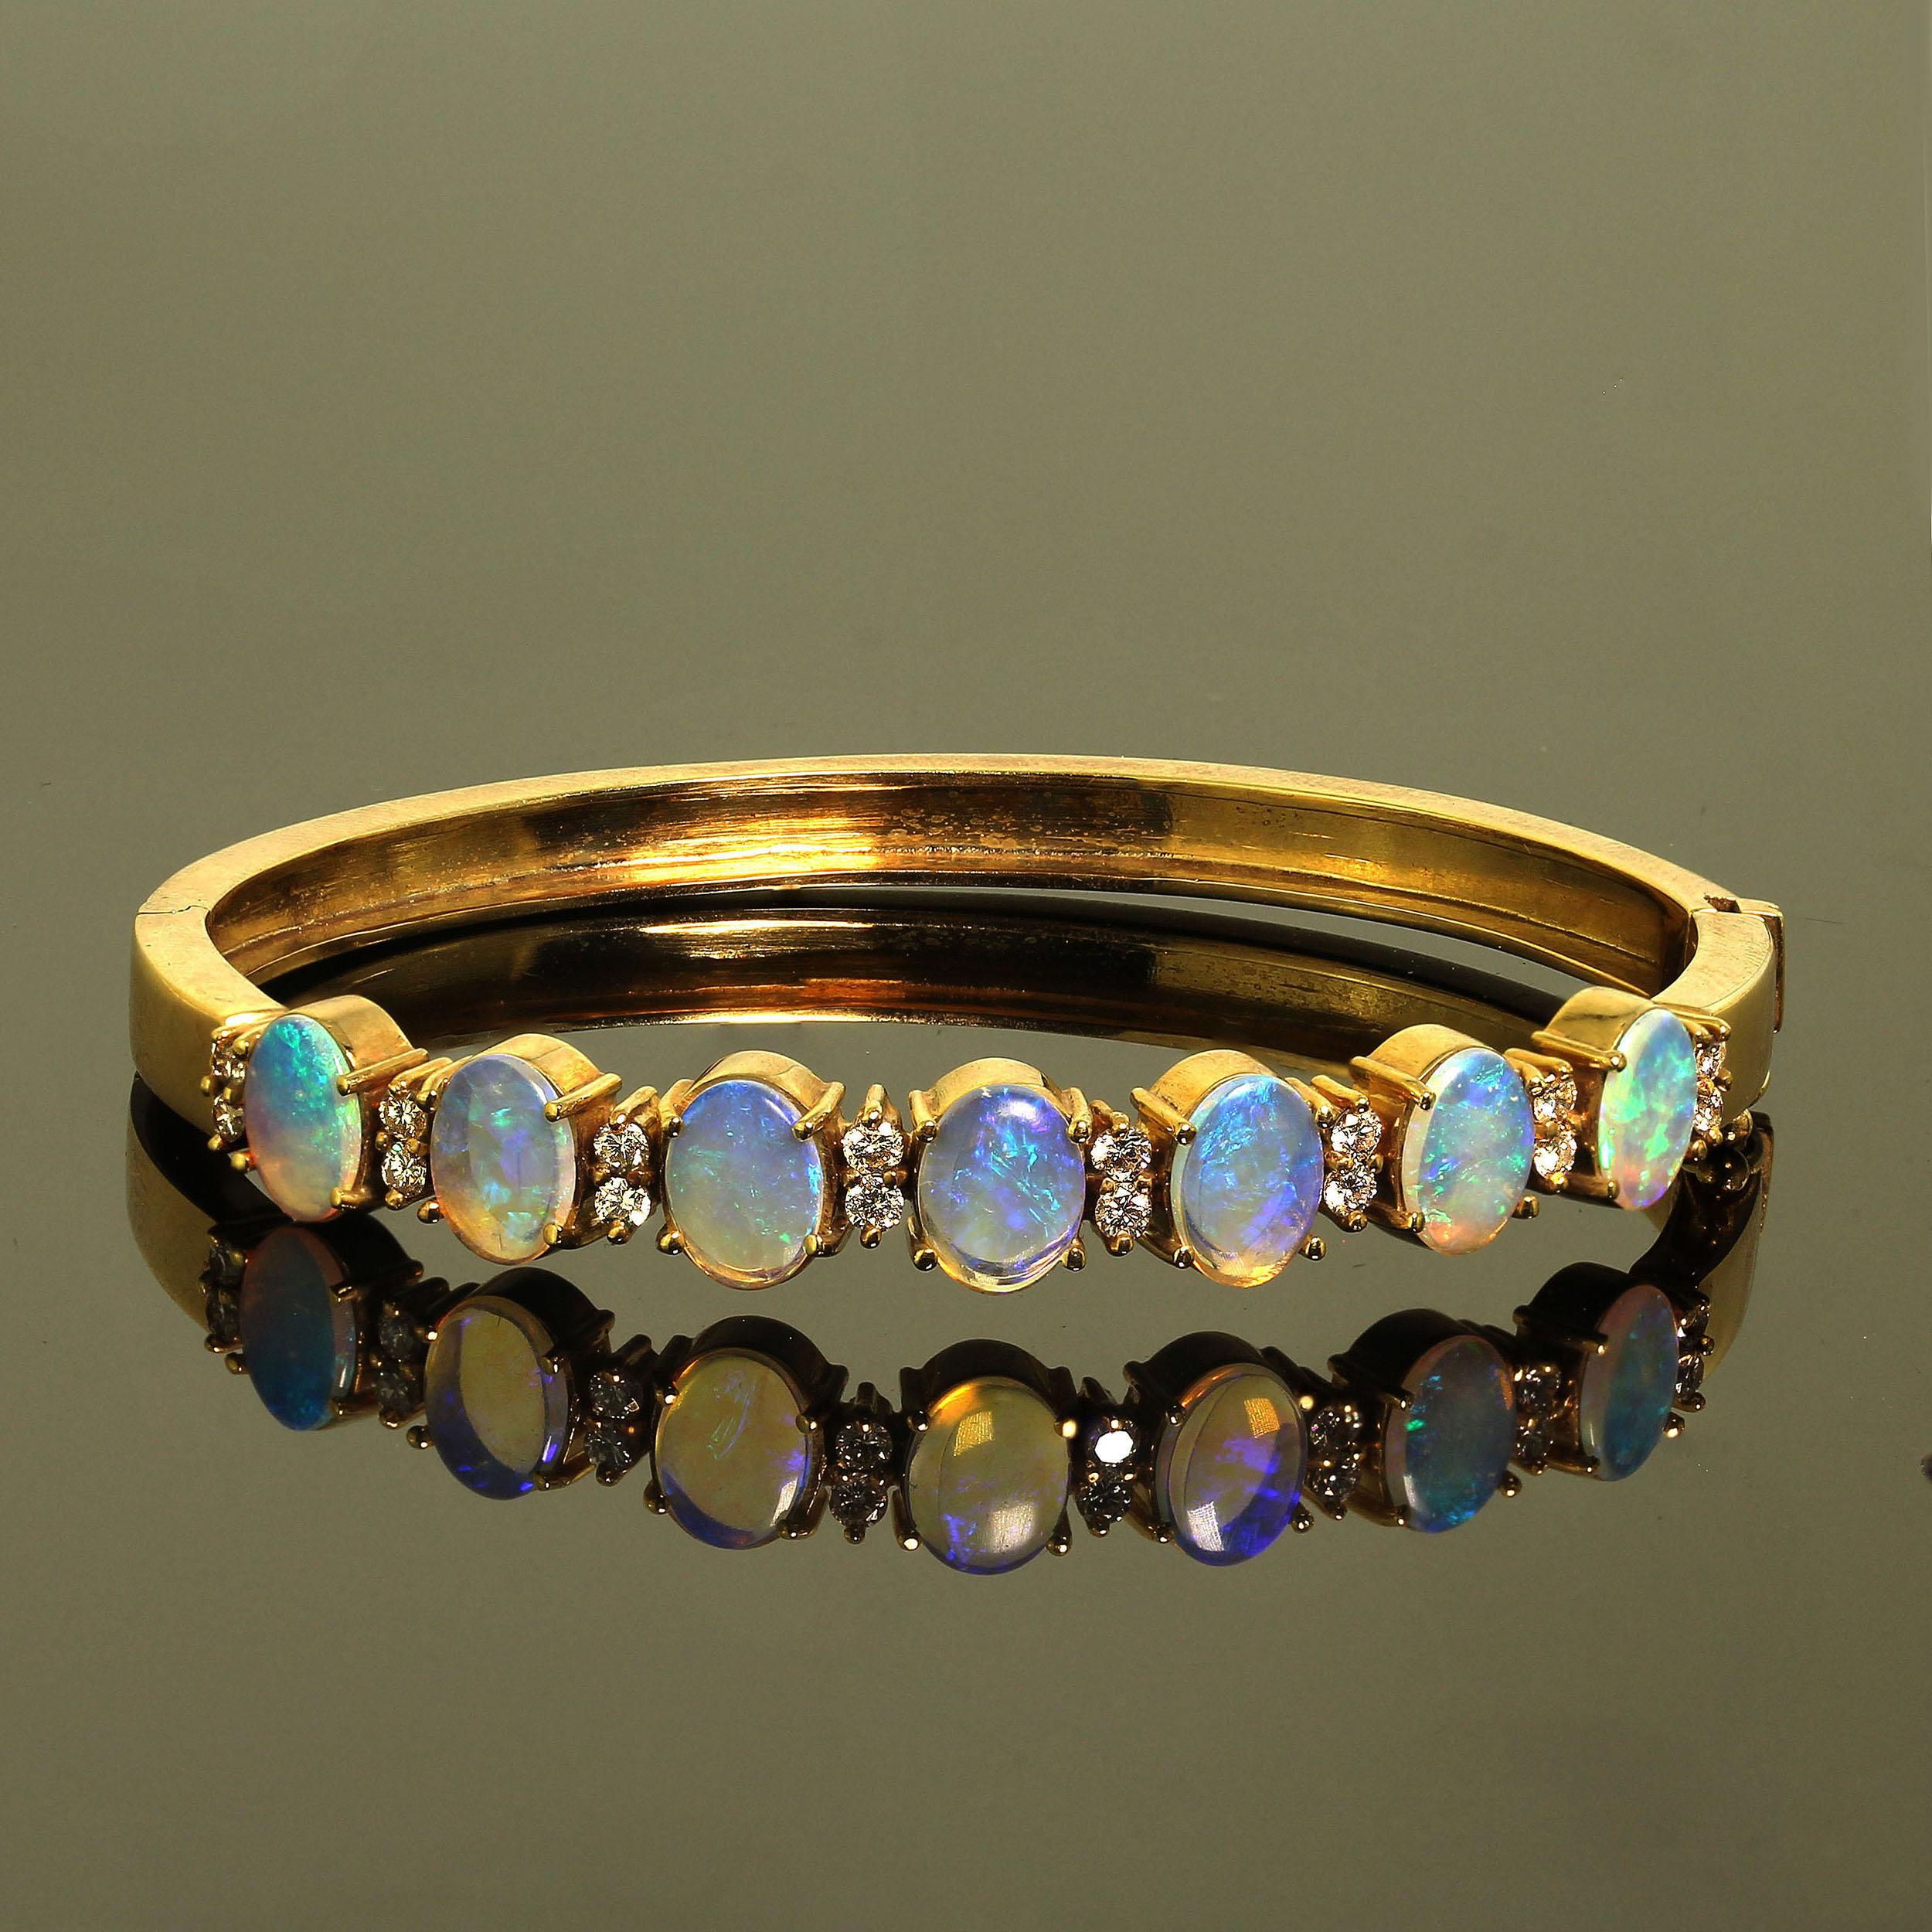 Glorious Opal and Diamond Bracelet set in 18K yellow gold.  This is a hand made bangle style bracelet with seven oval opals (8 X 6 MM)  across the front of the bracelet.  The opals are enhanced by 16 Diamonds of approximately 0.50 carats total